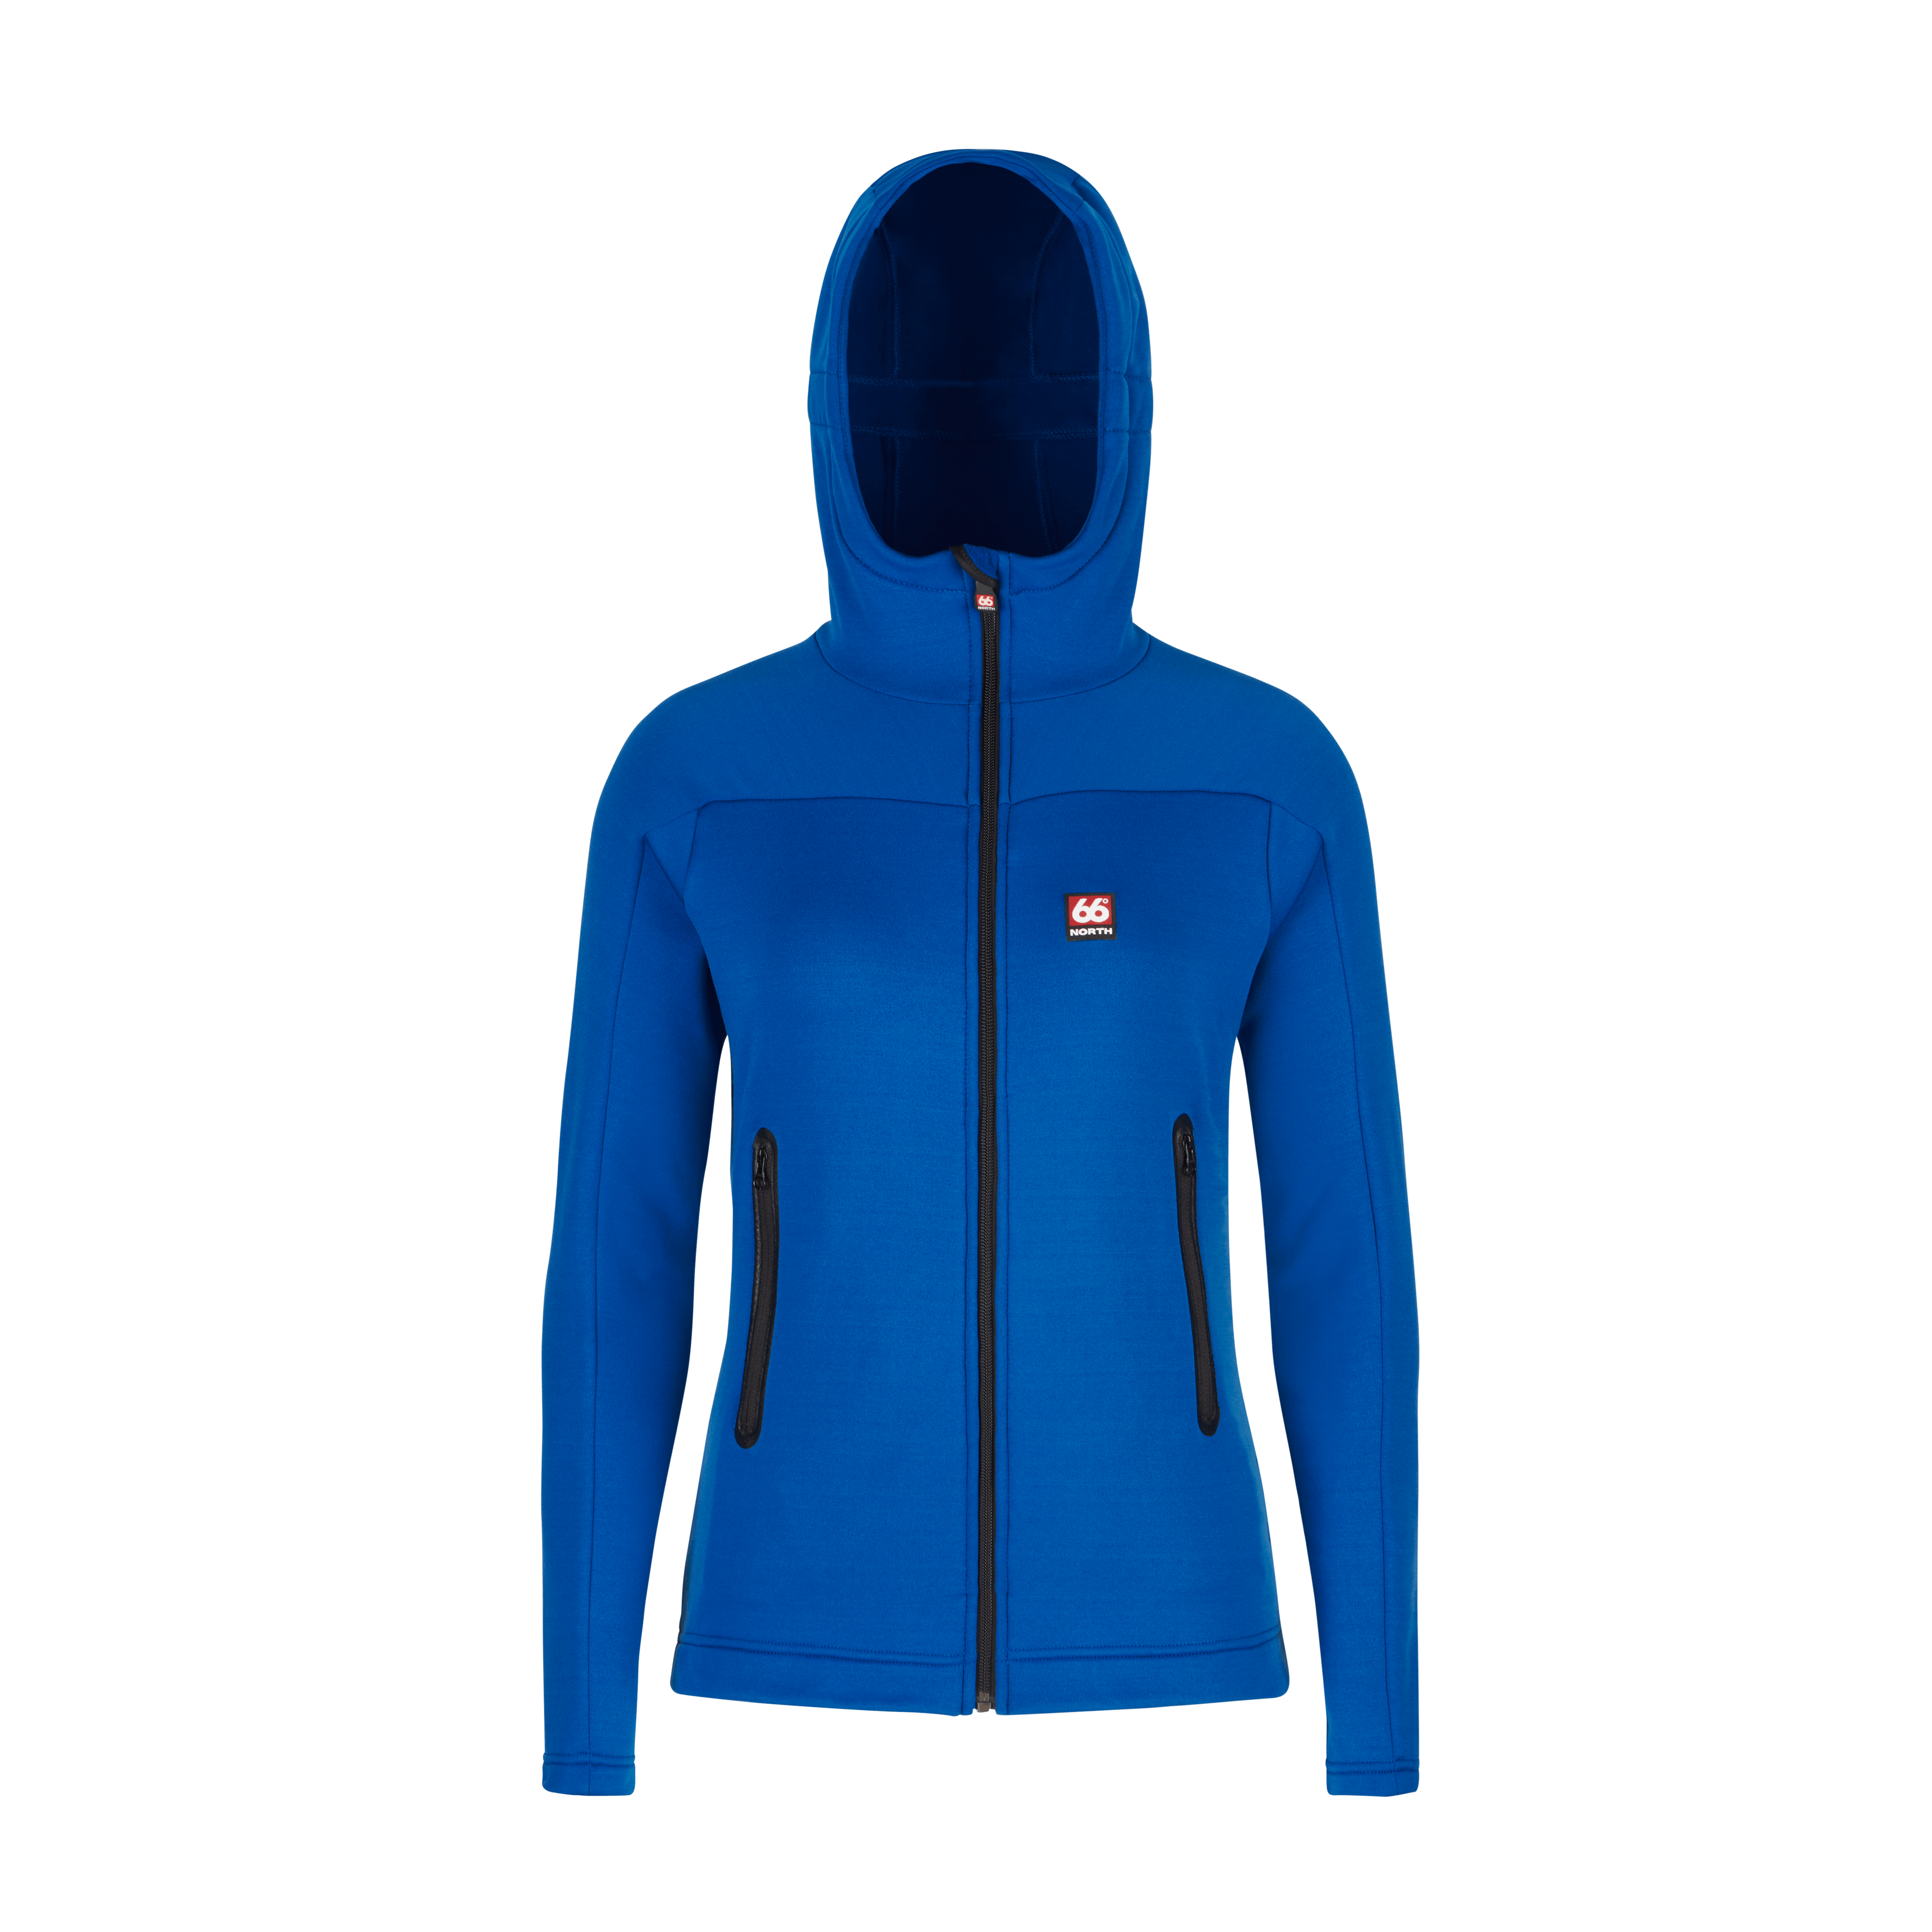 66 North Womens Snfell TopsandVests - Classic Blue - Xl